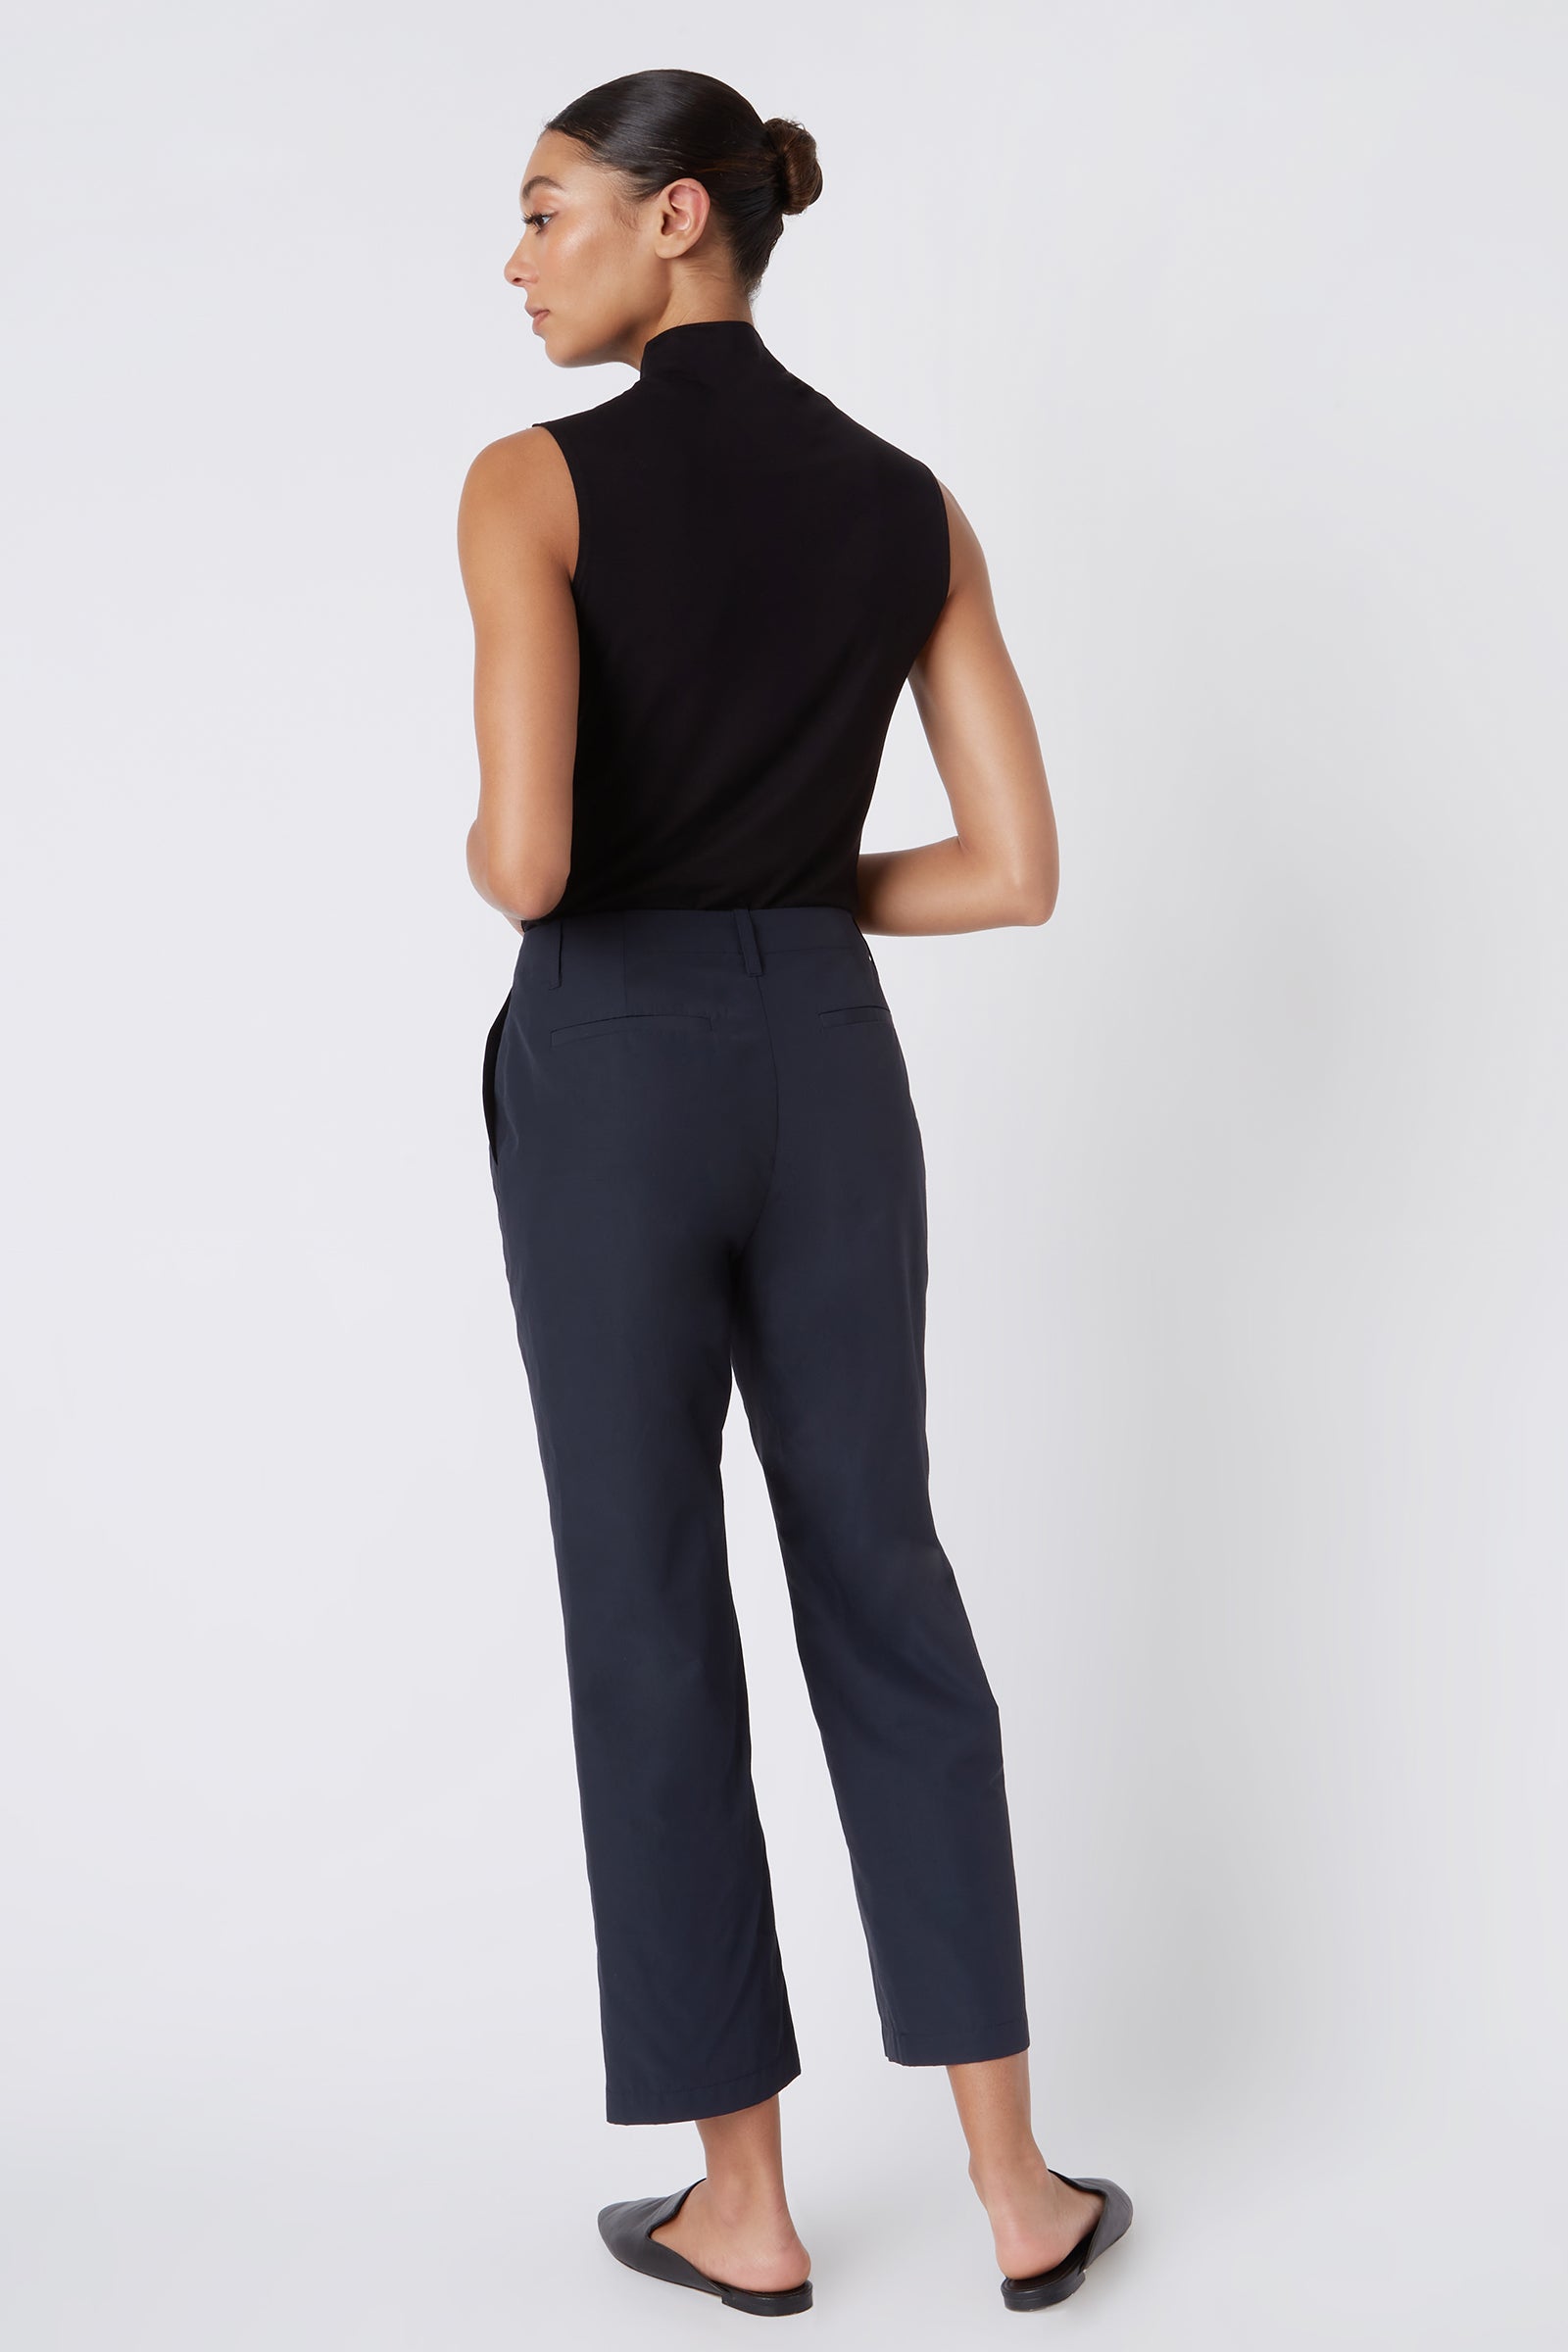 Kal Rieman Francoise Cigarette Pant in Navy Italian Broadcloth on Model with Arms Crossed Full Front View